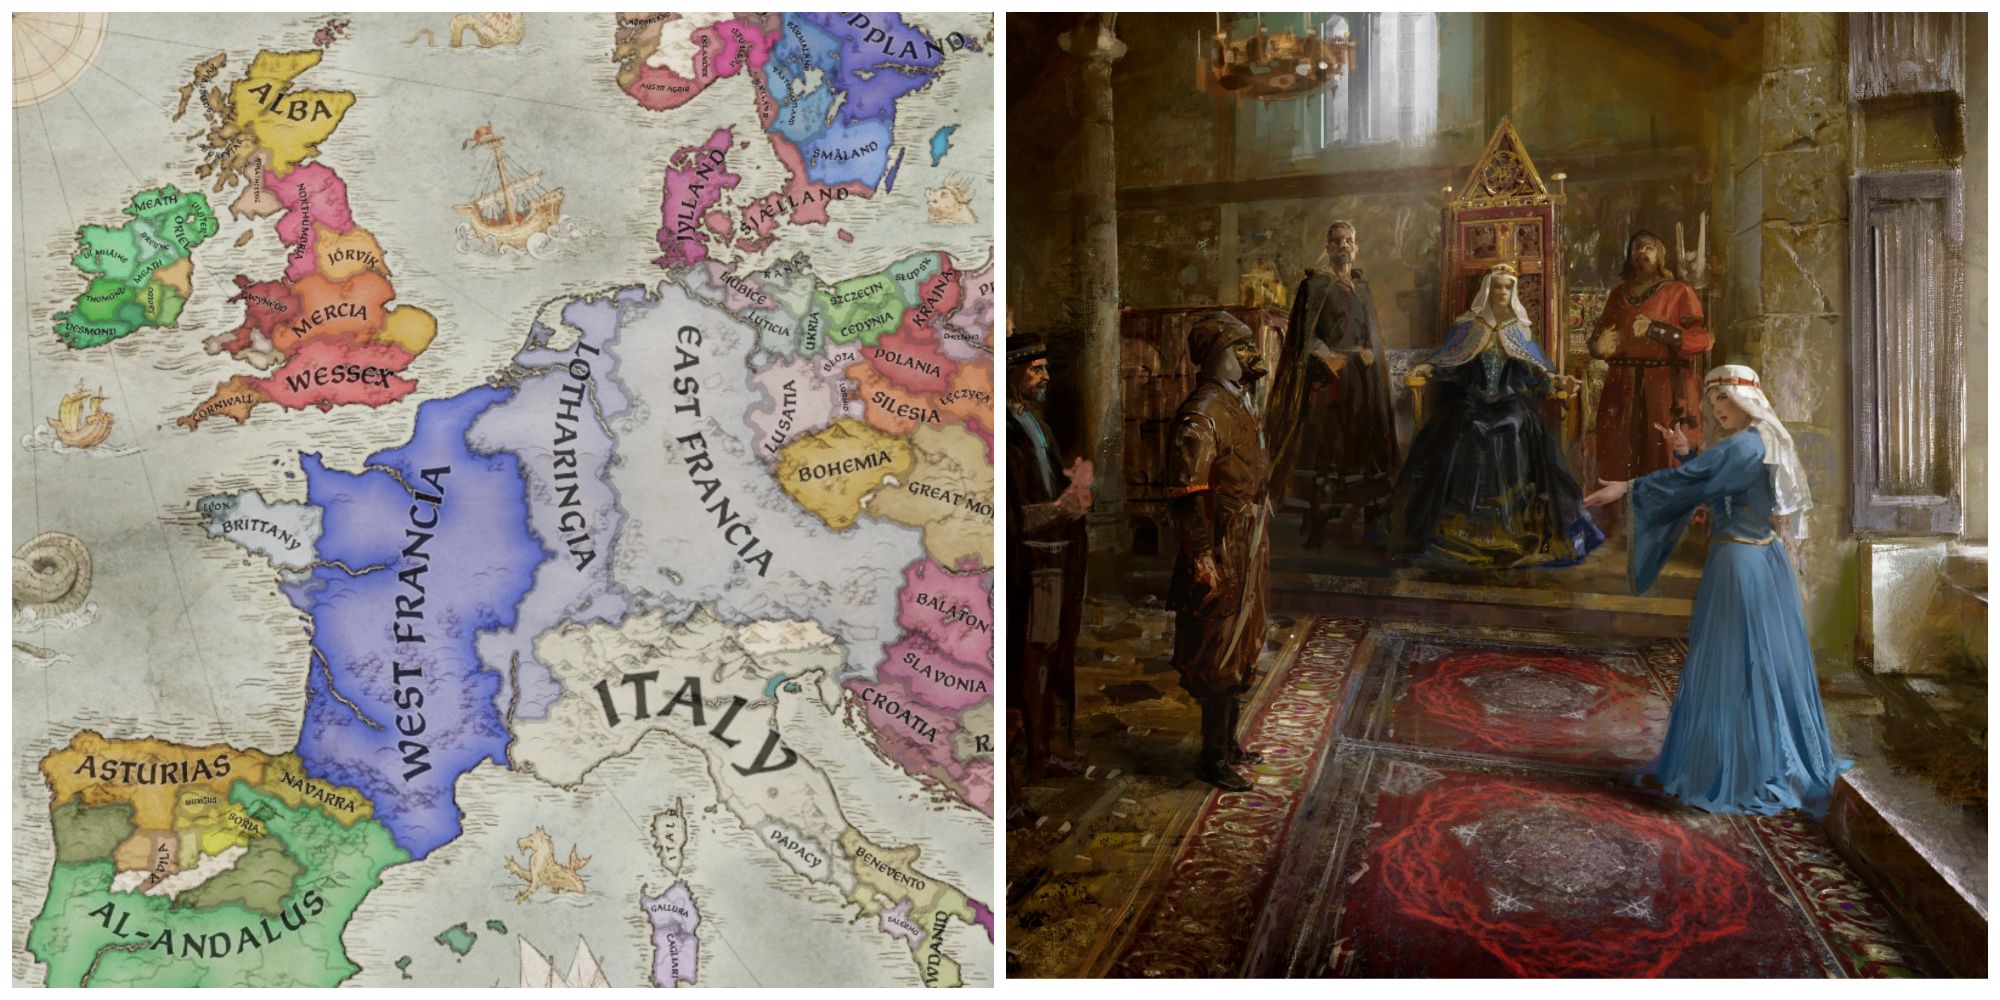 Crusader Kings 3 split image, map of Europe 867 and loading screen art of queen and her court